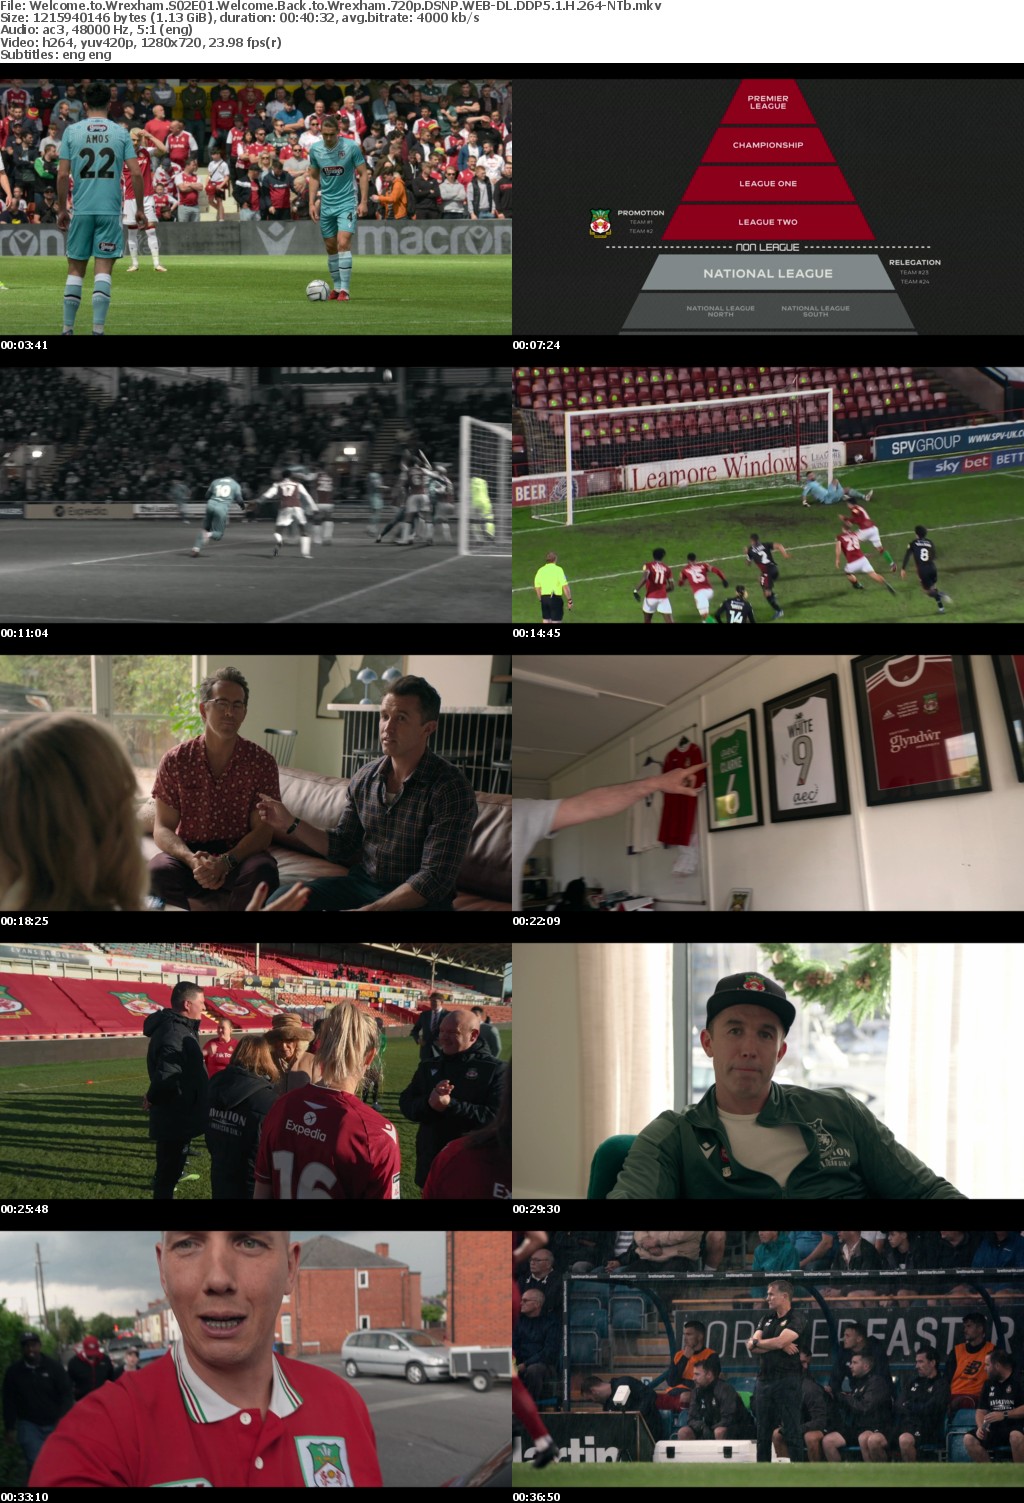 Welcome to Wrexham S02E01 Welcome Back to Wrexham 720p DSNP WEB-DL DDP5 1 H 264-NTb